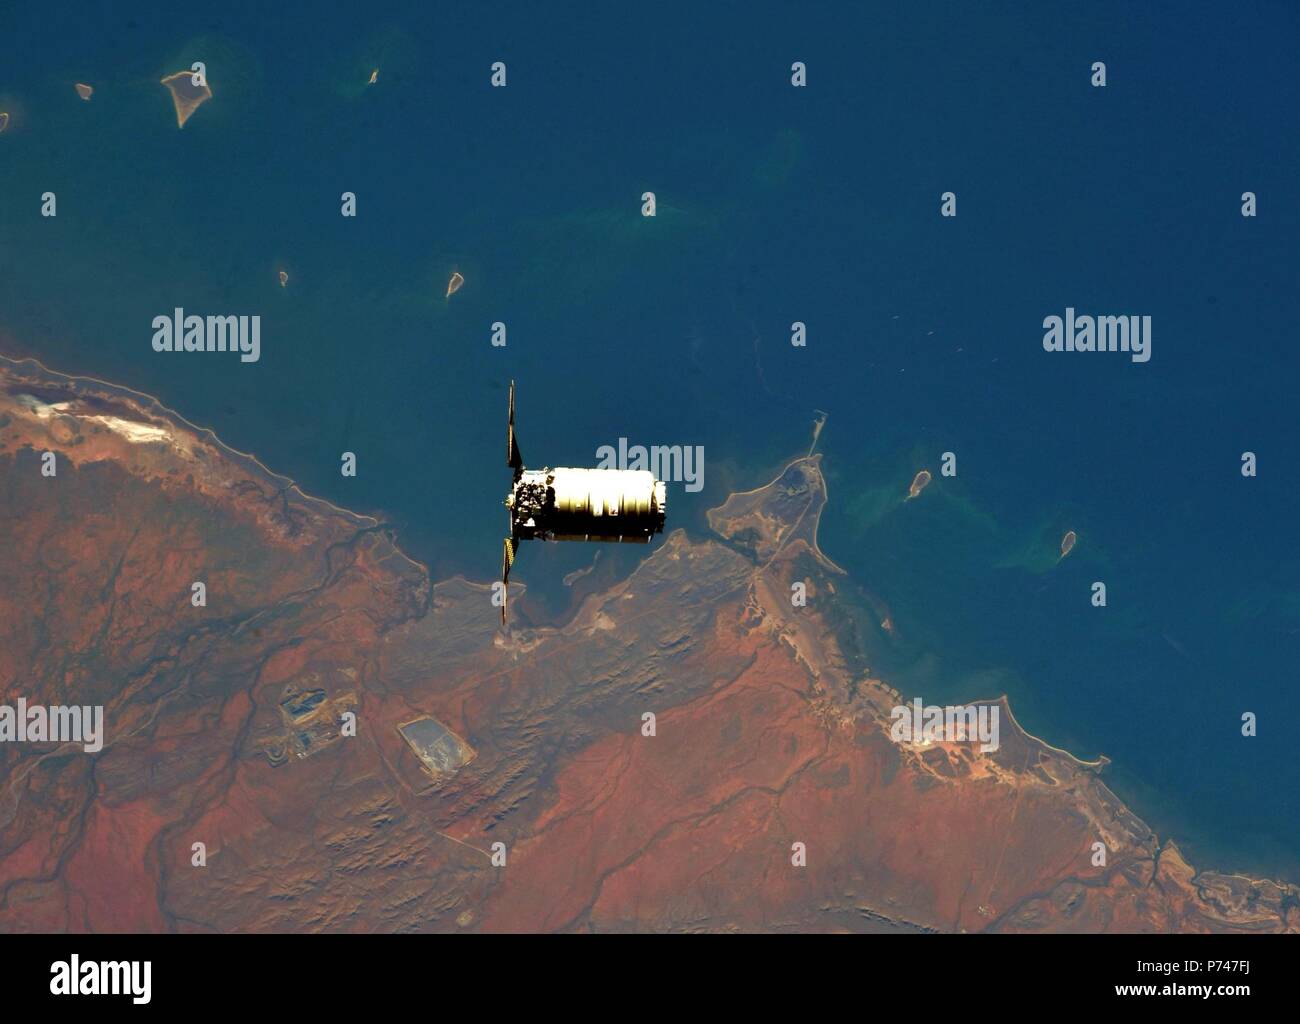 The Northrop Grumman Orbital ATK Cygnus commercial cargo spacecraft approaches the International Space Station for docking over the coast of Australia April 22, 2018 in Earth Orbit. Stock Photo